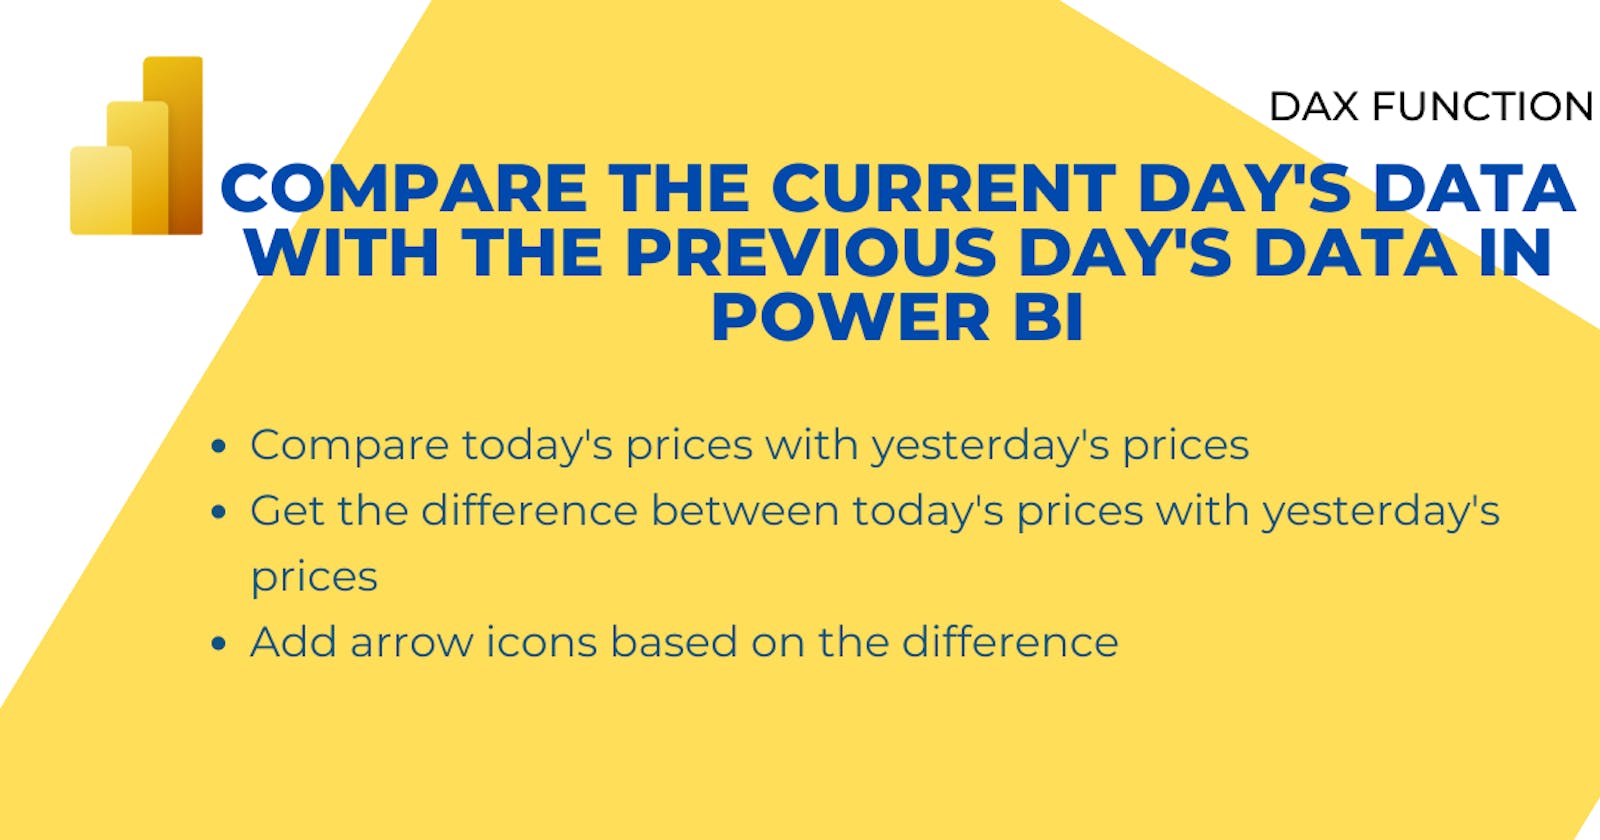 Compare the current day's data with the previous day's data in Power BI.